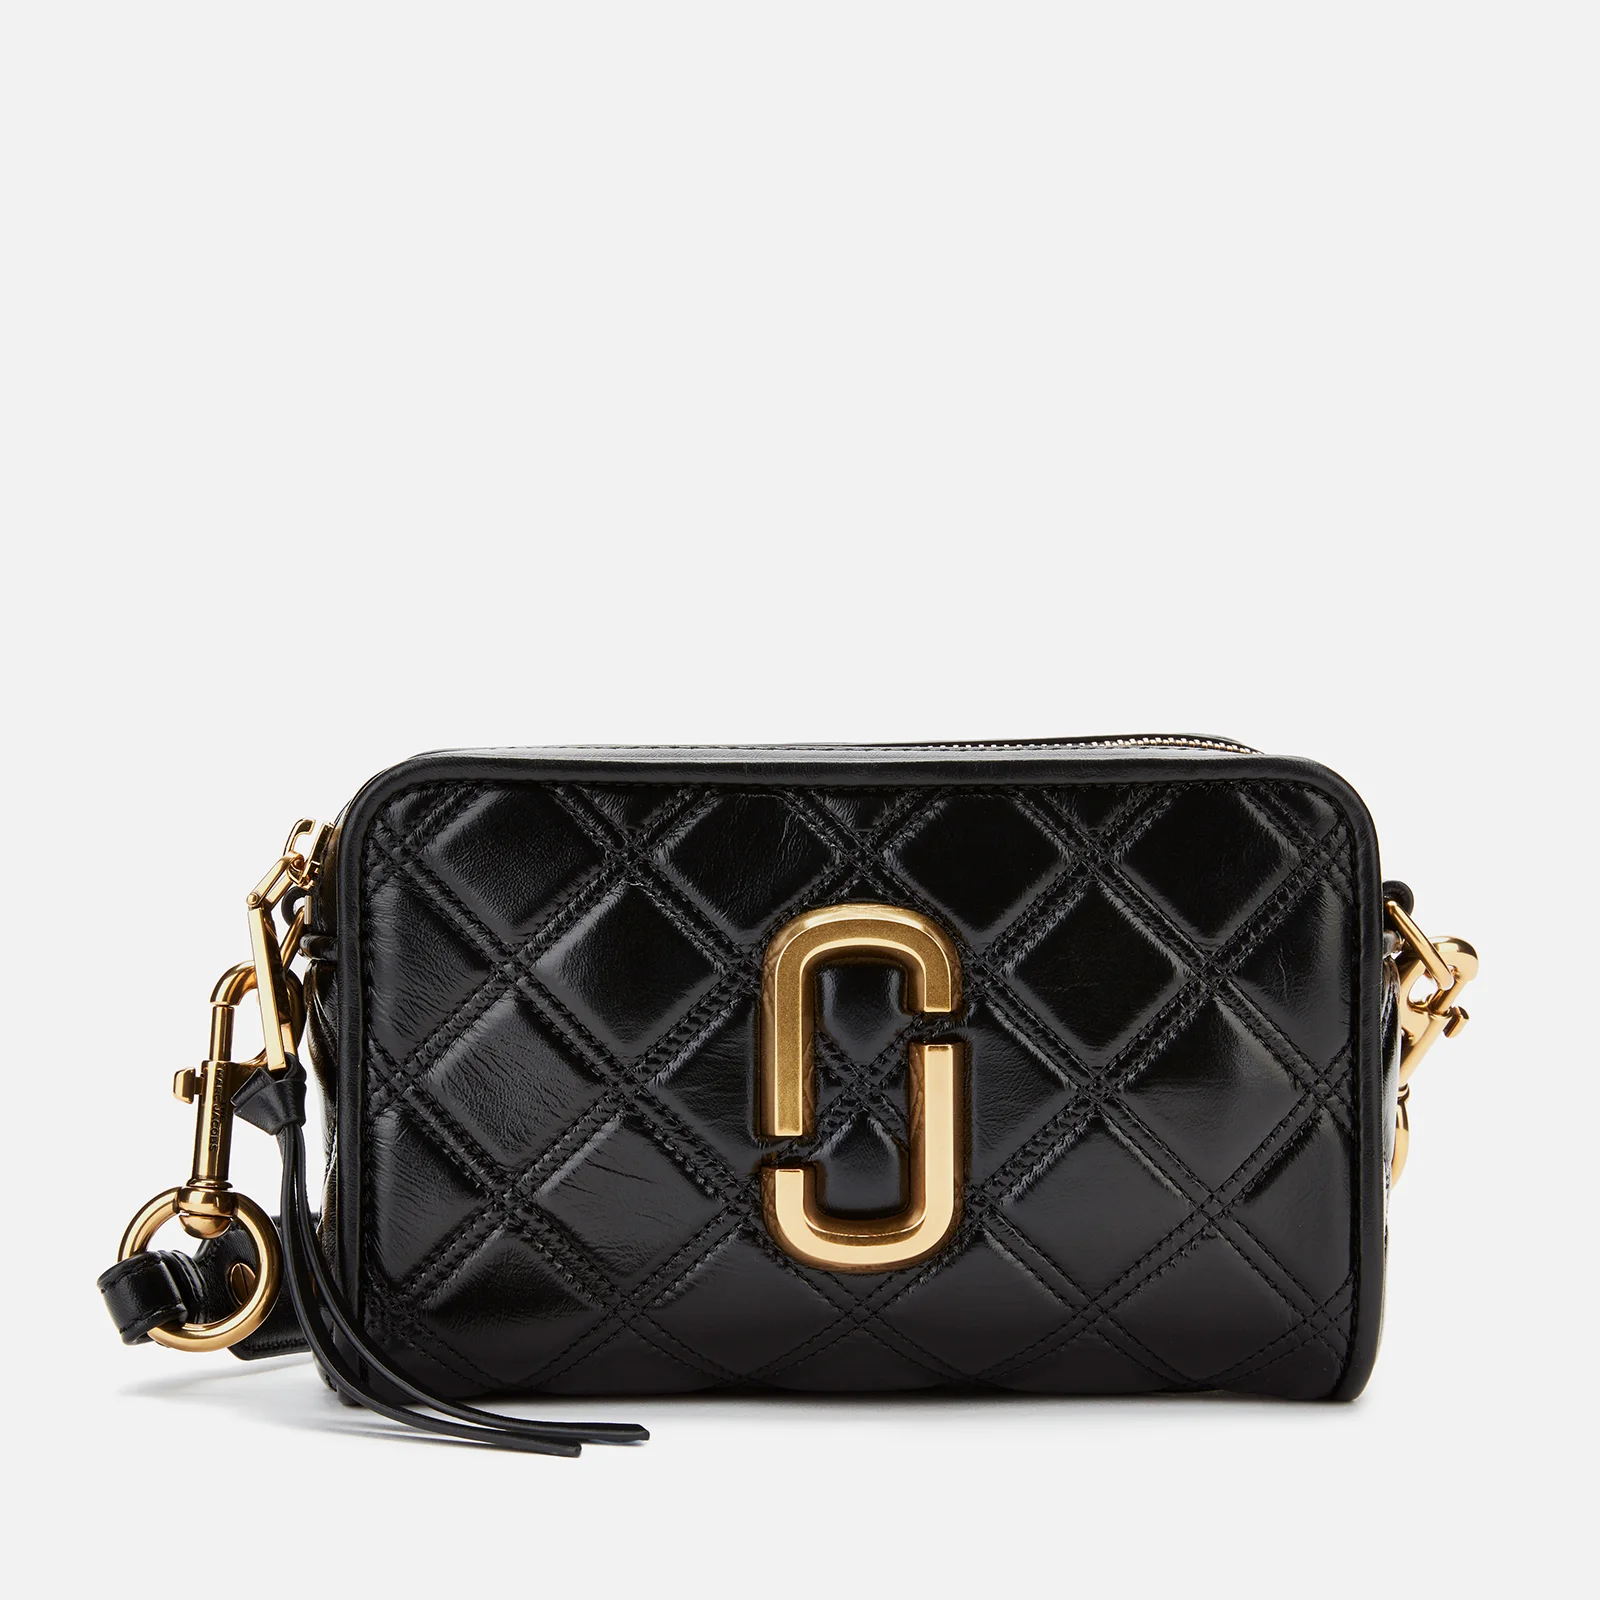 Marc Jacobs Women's The Softshot 21 Quilted Cross Body Bag - Black/Gold Image 1